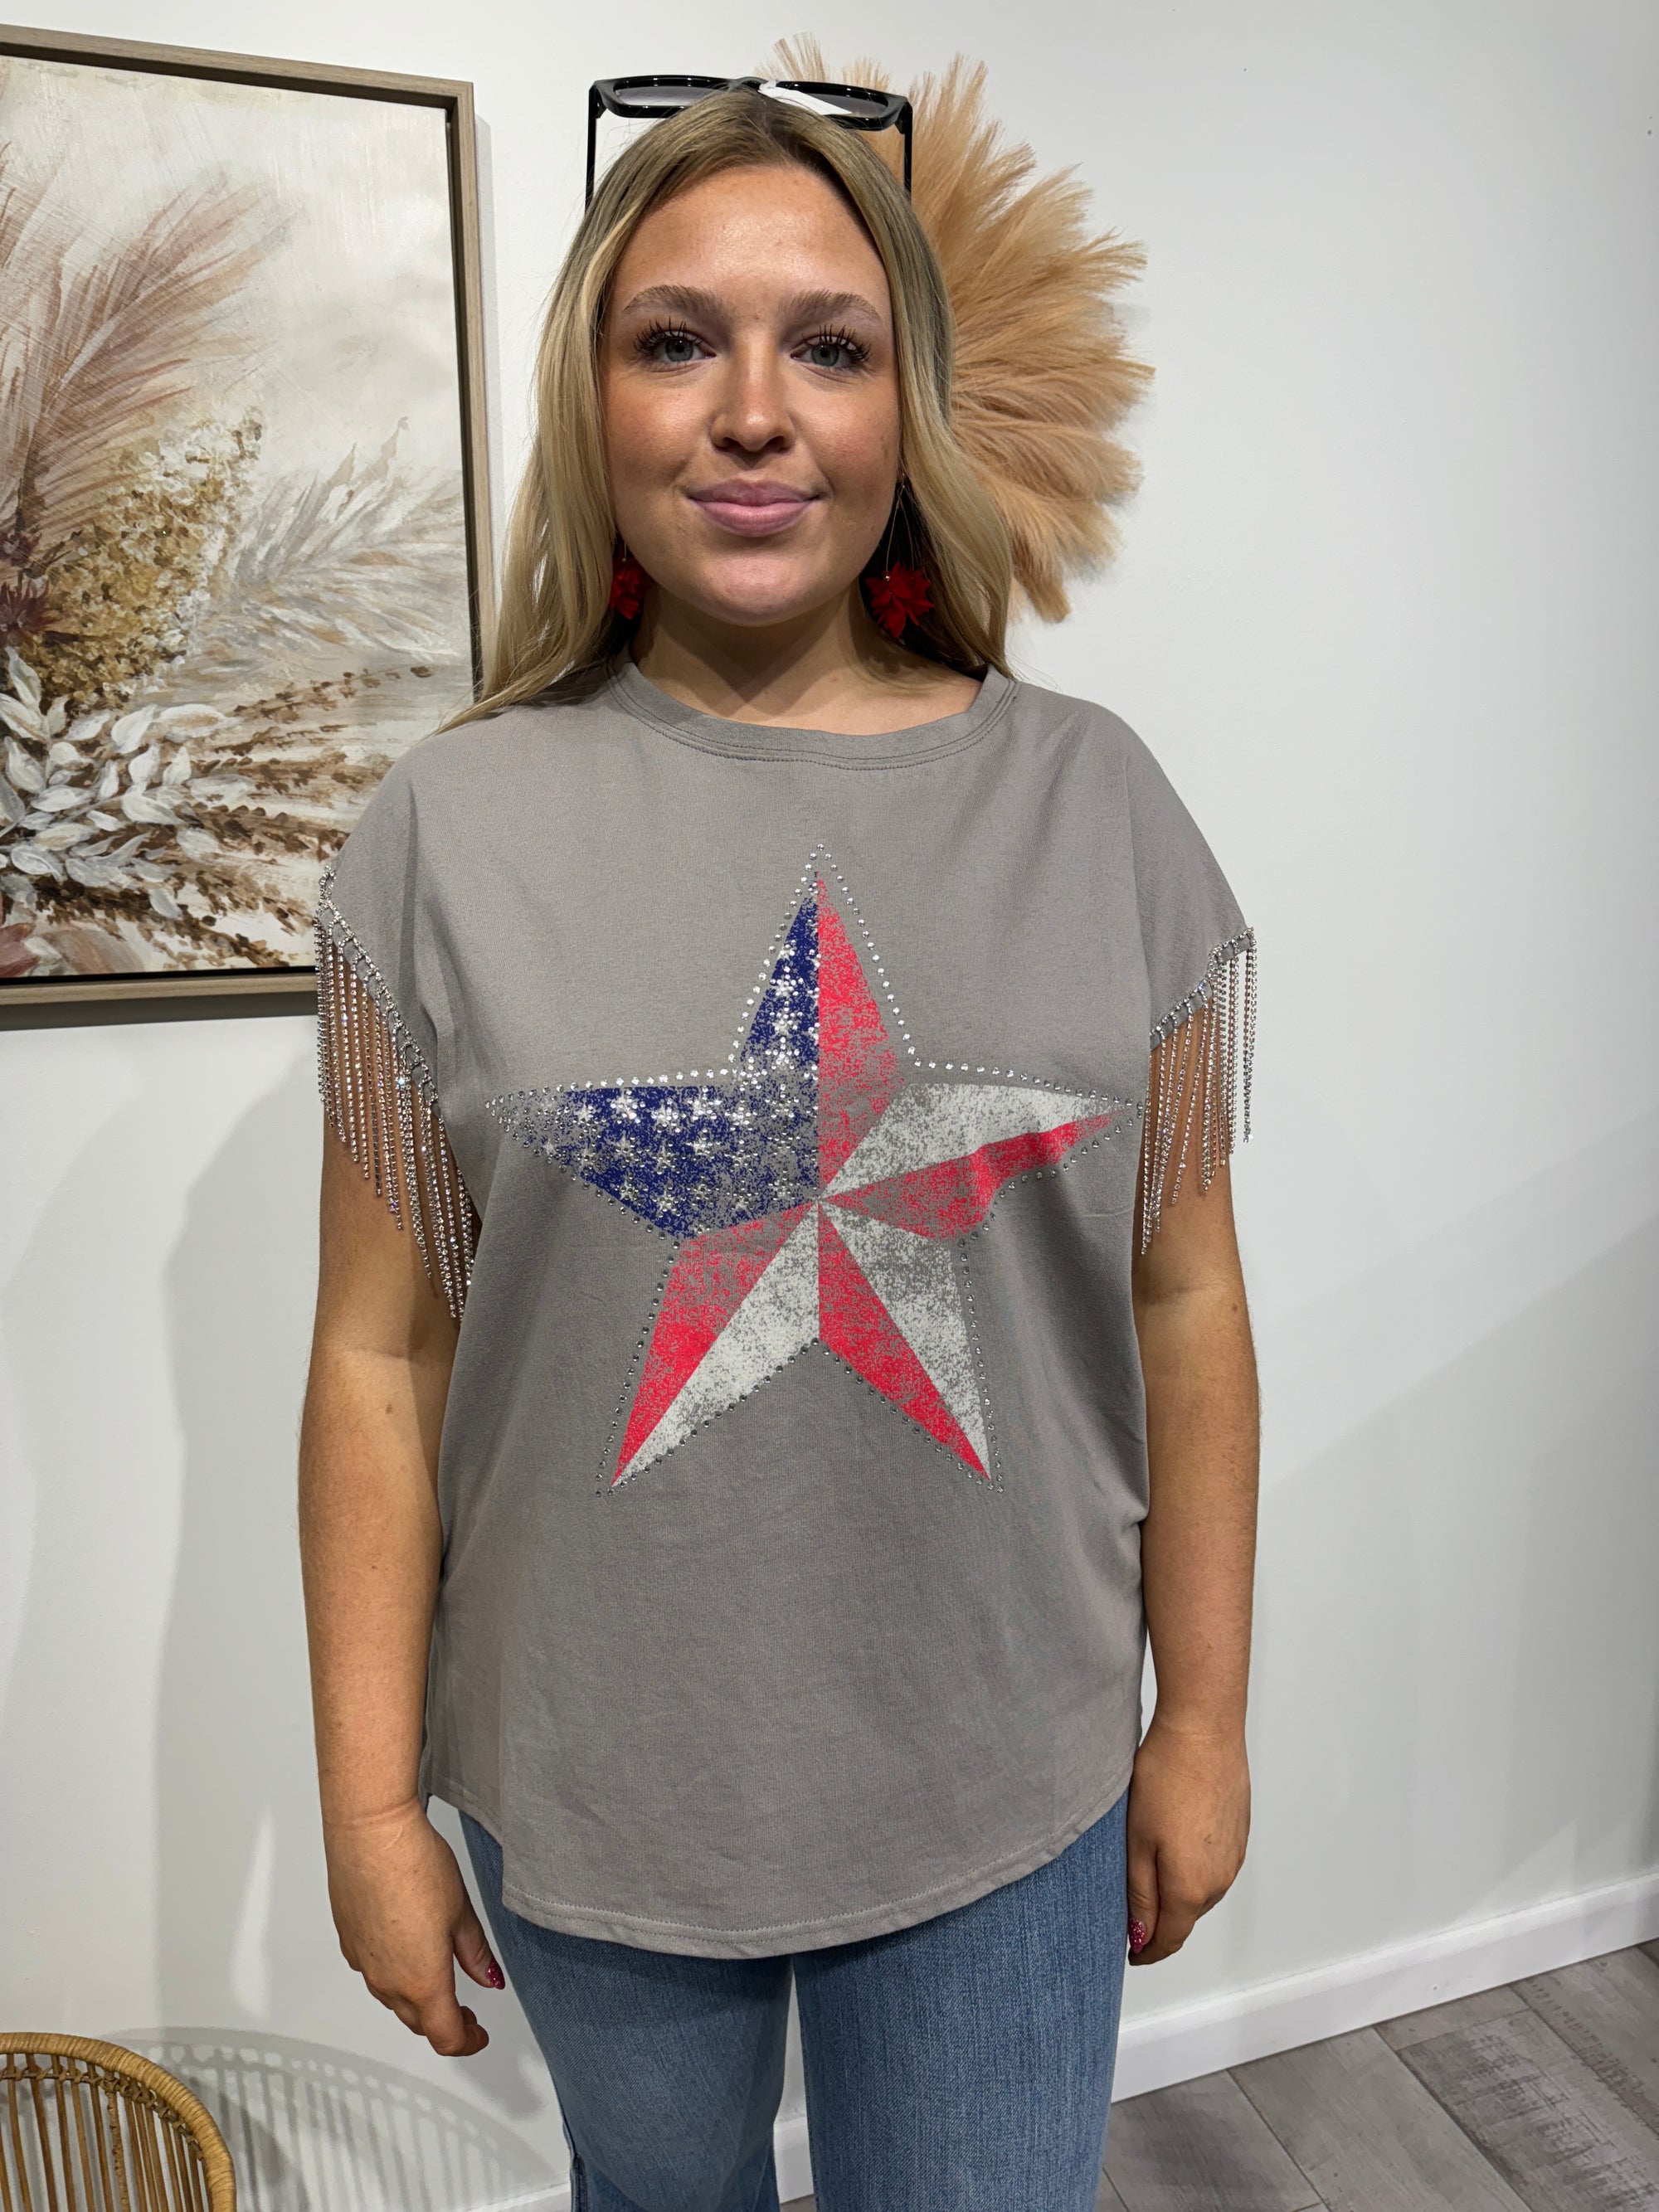 Justice - An American Star Printed Top with Rhinestone Fringe